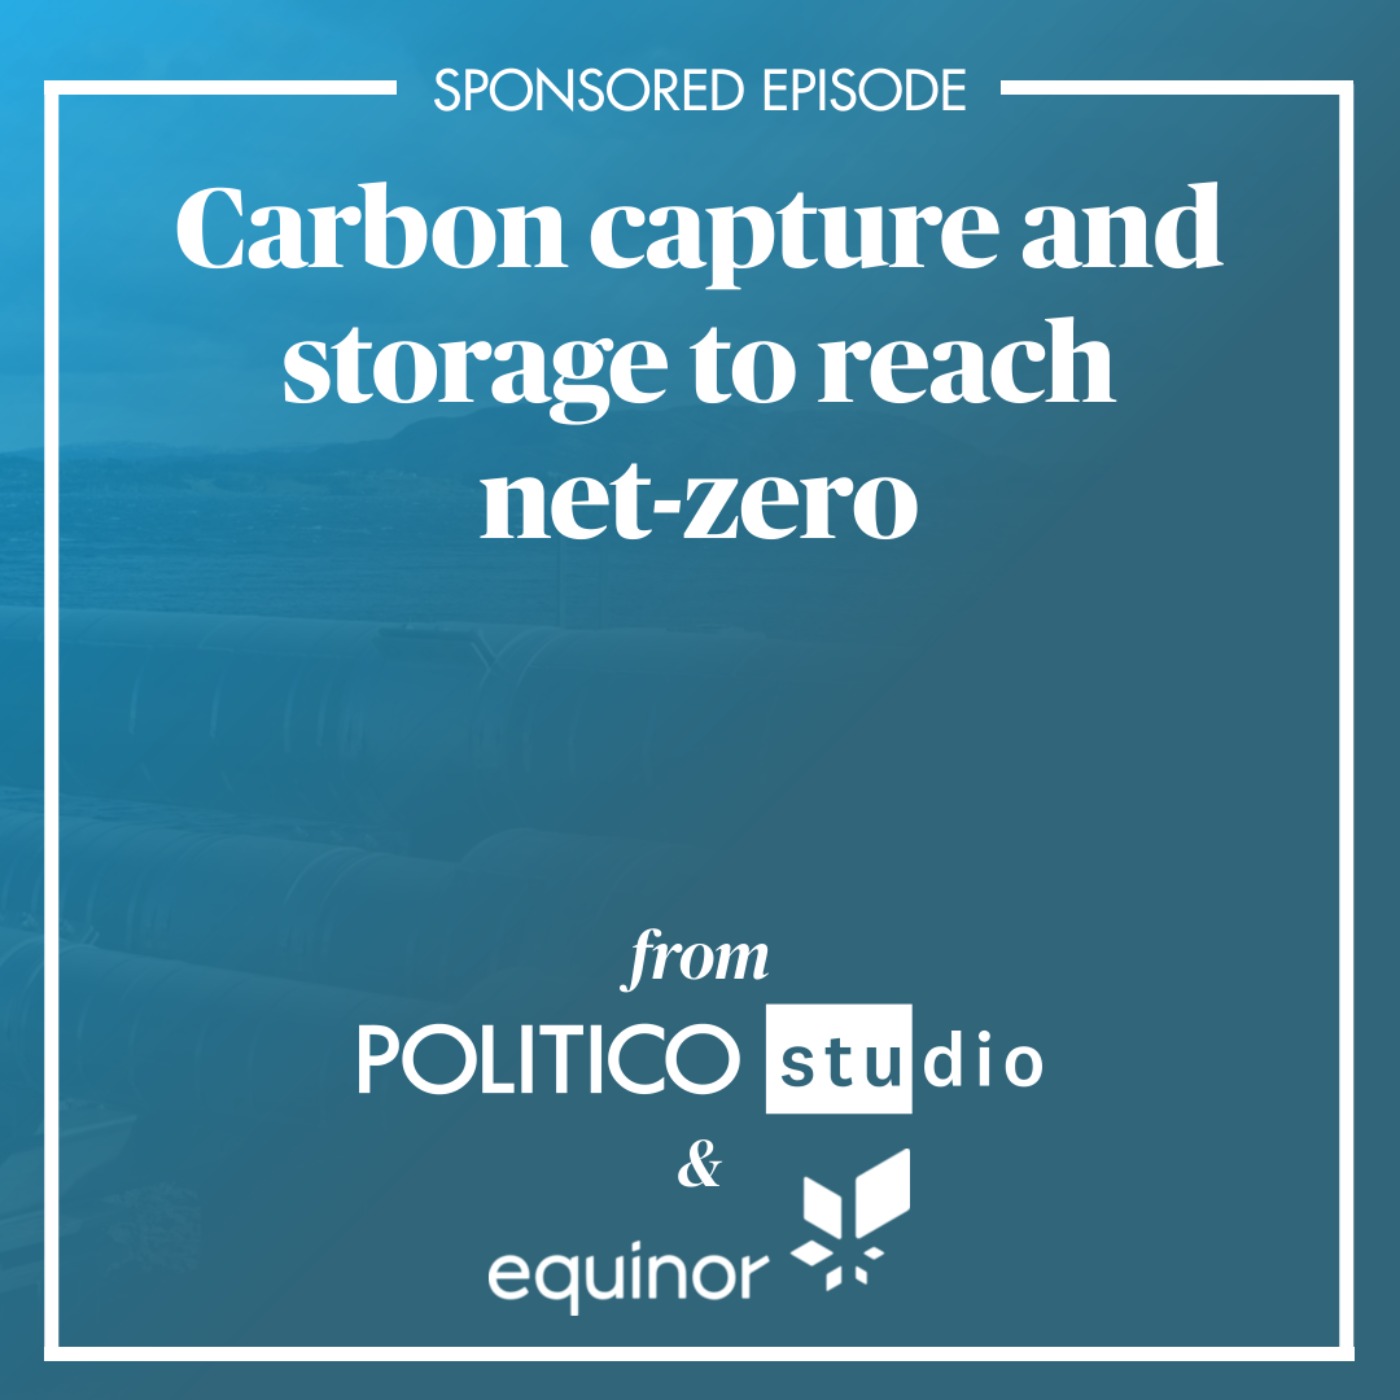 SPONSORED CONTENT: Carbon capture and storage to reach net zero